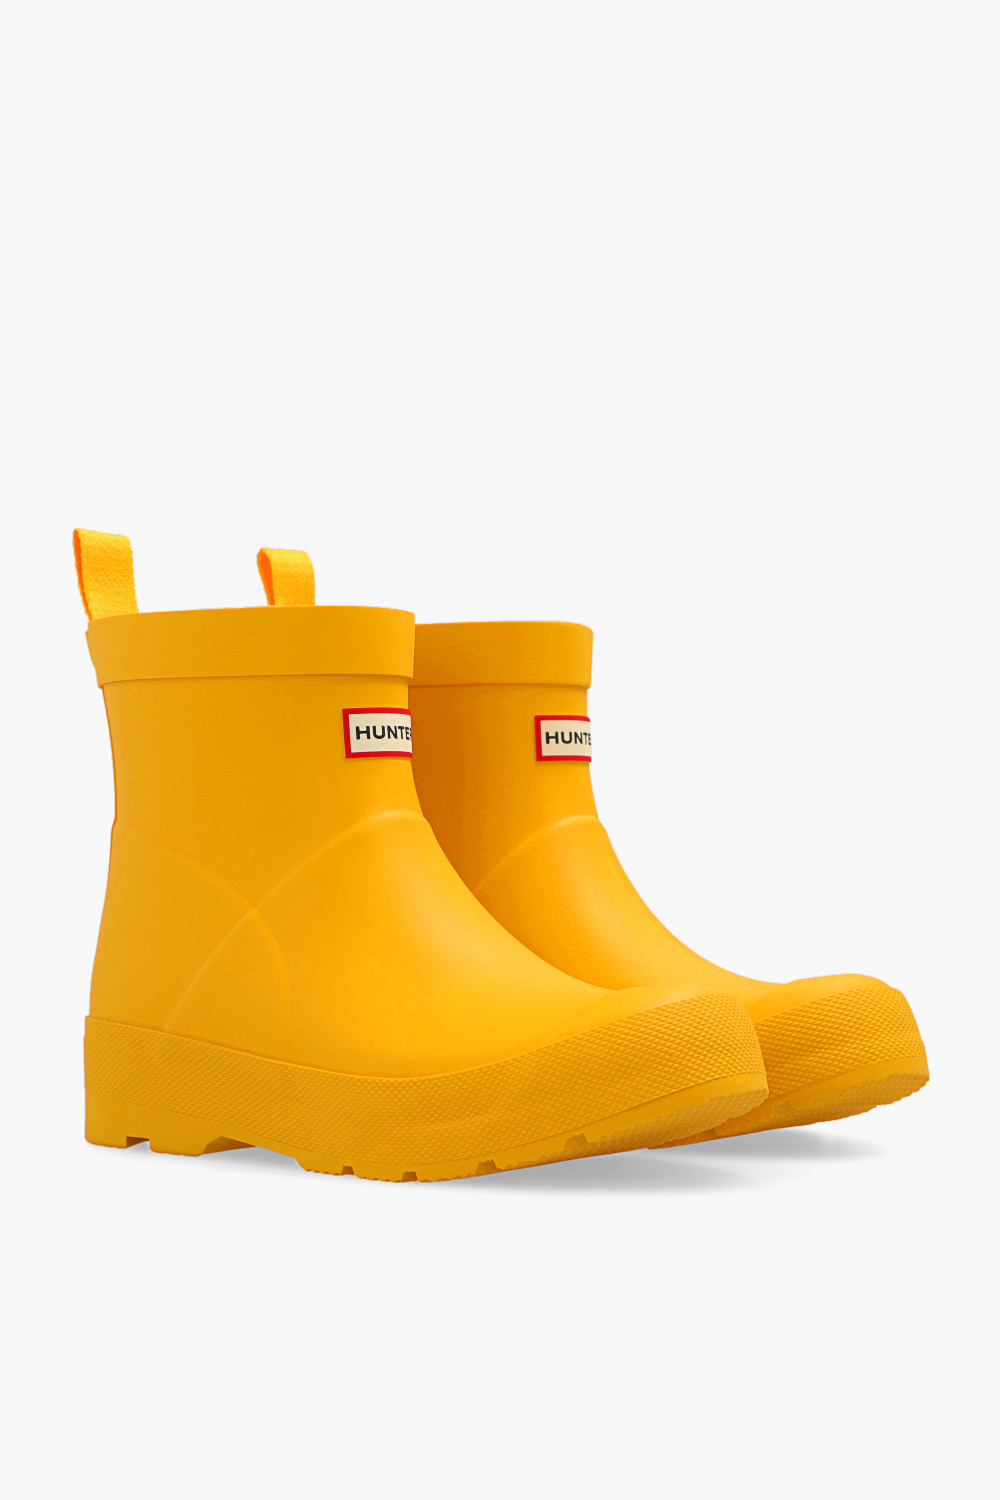 your outfit wearing the adorable ™ Brigit Sandals - MK - 'Play' rain boots Hunter Kids